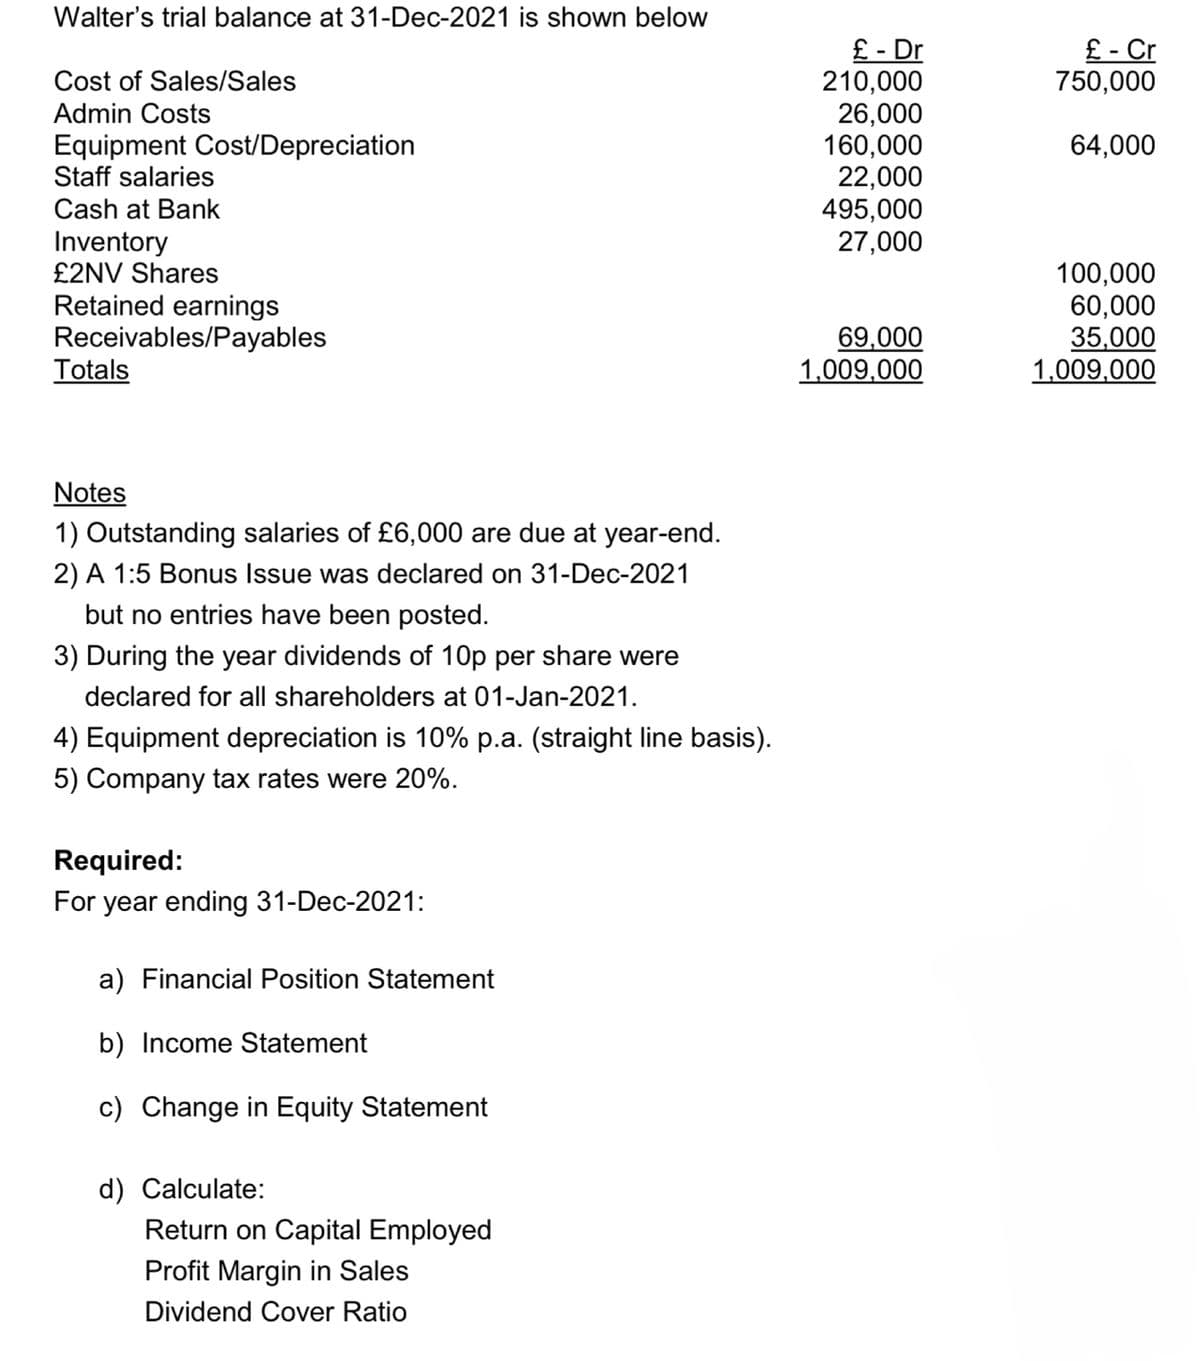 Walter's trial balance at 31-Dec-2021 is shown below
£ - Dr
210,000
Cost of Sales/Sales
Admin Costs
Equipment Cost/Depreciation
Staff salaries
Cash at Bank
Inventory
£2NV Shares
Retained earnings
Receivables/Payables
Totals
Notes
1) Outstanding salaries of £6,000 are due at year-end.
2) A 1:5 Bonus Issue was declared on 31-Dec-2021
but no entries have been posted.
3) During the year dividends of 10p per share were
declared for all shareholders at 01-Jan-2021.
4) Equipment depreciation is 10% p.a. (straight line basis).
5) Company tax rates were 20%.
Required:
For year ending 31-Dec-2021:
a) Financial Position Statement
b) Income Statement
c) Change in Equity Statement
d) Calculate:
Return on Capital Employed
Profit Margin in Sales
Dividend Cover Ratio
£-Cr
750,000
26,000
160,000
64,000
22,000
495,000
27,000
100,000
60,000
69,000
35,000
1,009,000
1,009,000